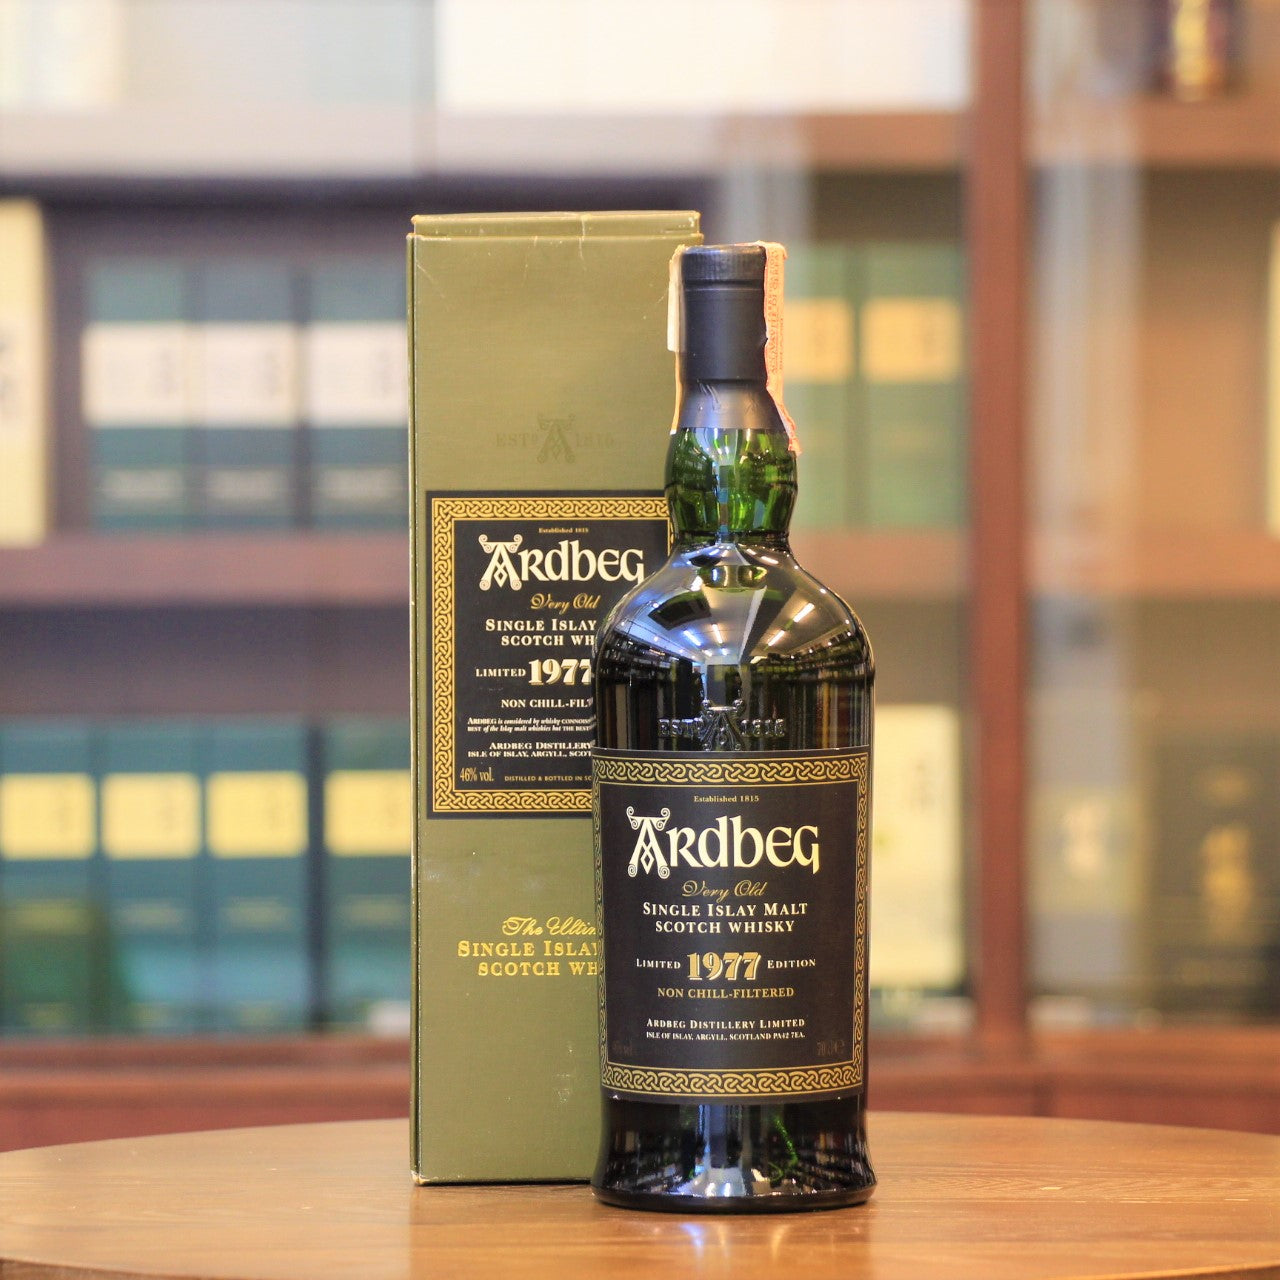 Released between 2001 and 2004, the 1977 vintage is a rare old bottling from Ardbeg. This particular bottle, we believe was released in 2001. A full bodied perfect balance of sweetness, fruit and intense smoky aromas with hints of toffee and fudge followed by mandarin fruit. This bottling has been rated 90+ points on Whiskybase (by over 400 reviewers).  Please note the slight damage on the box.